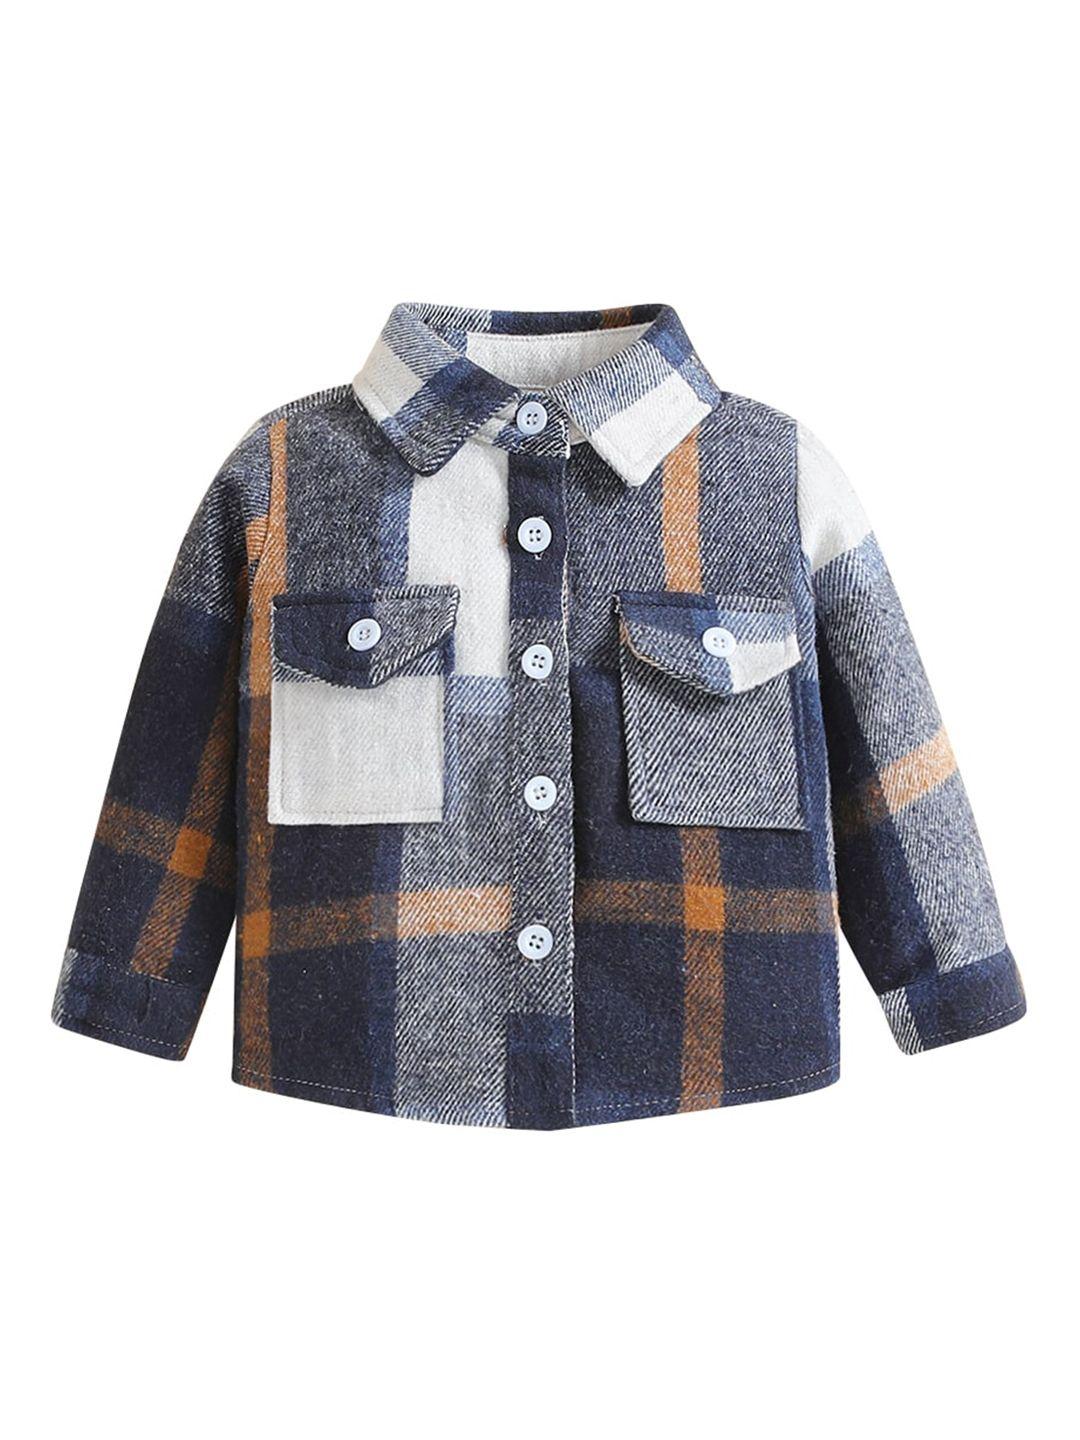 stylecast boys brown checked tailored jacket